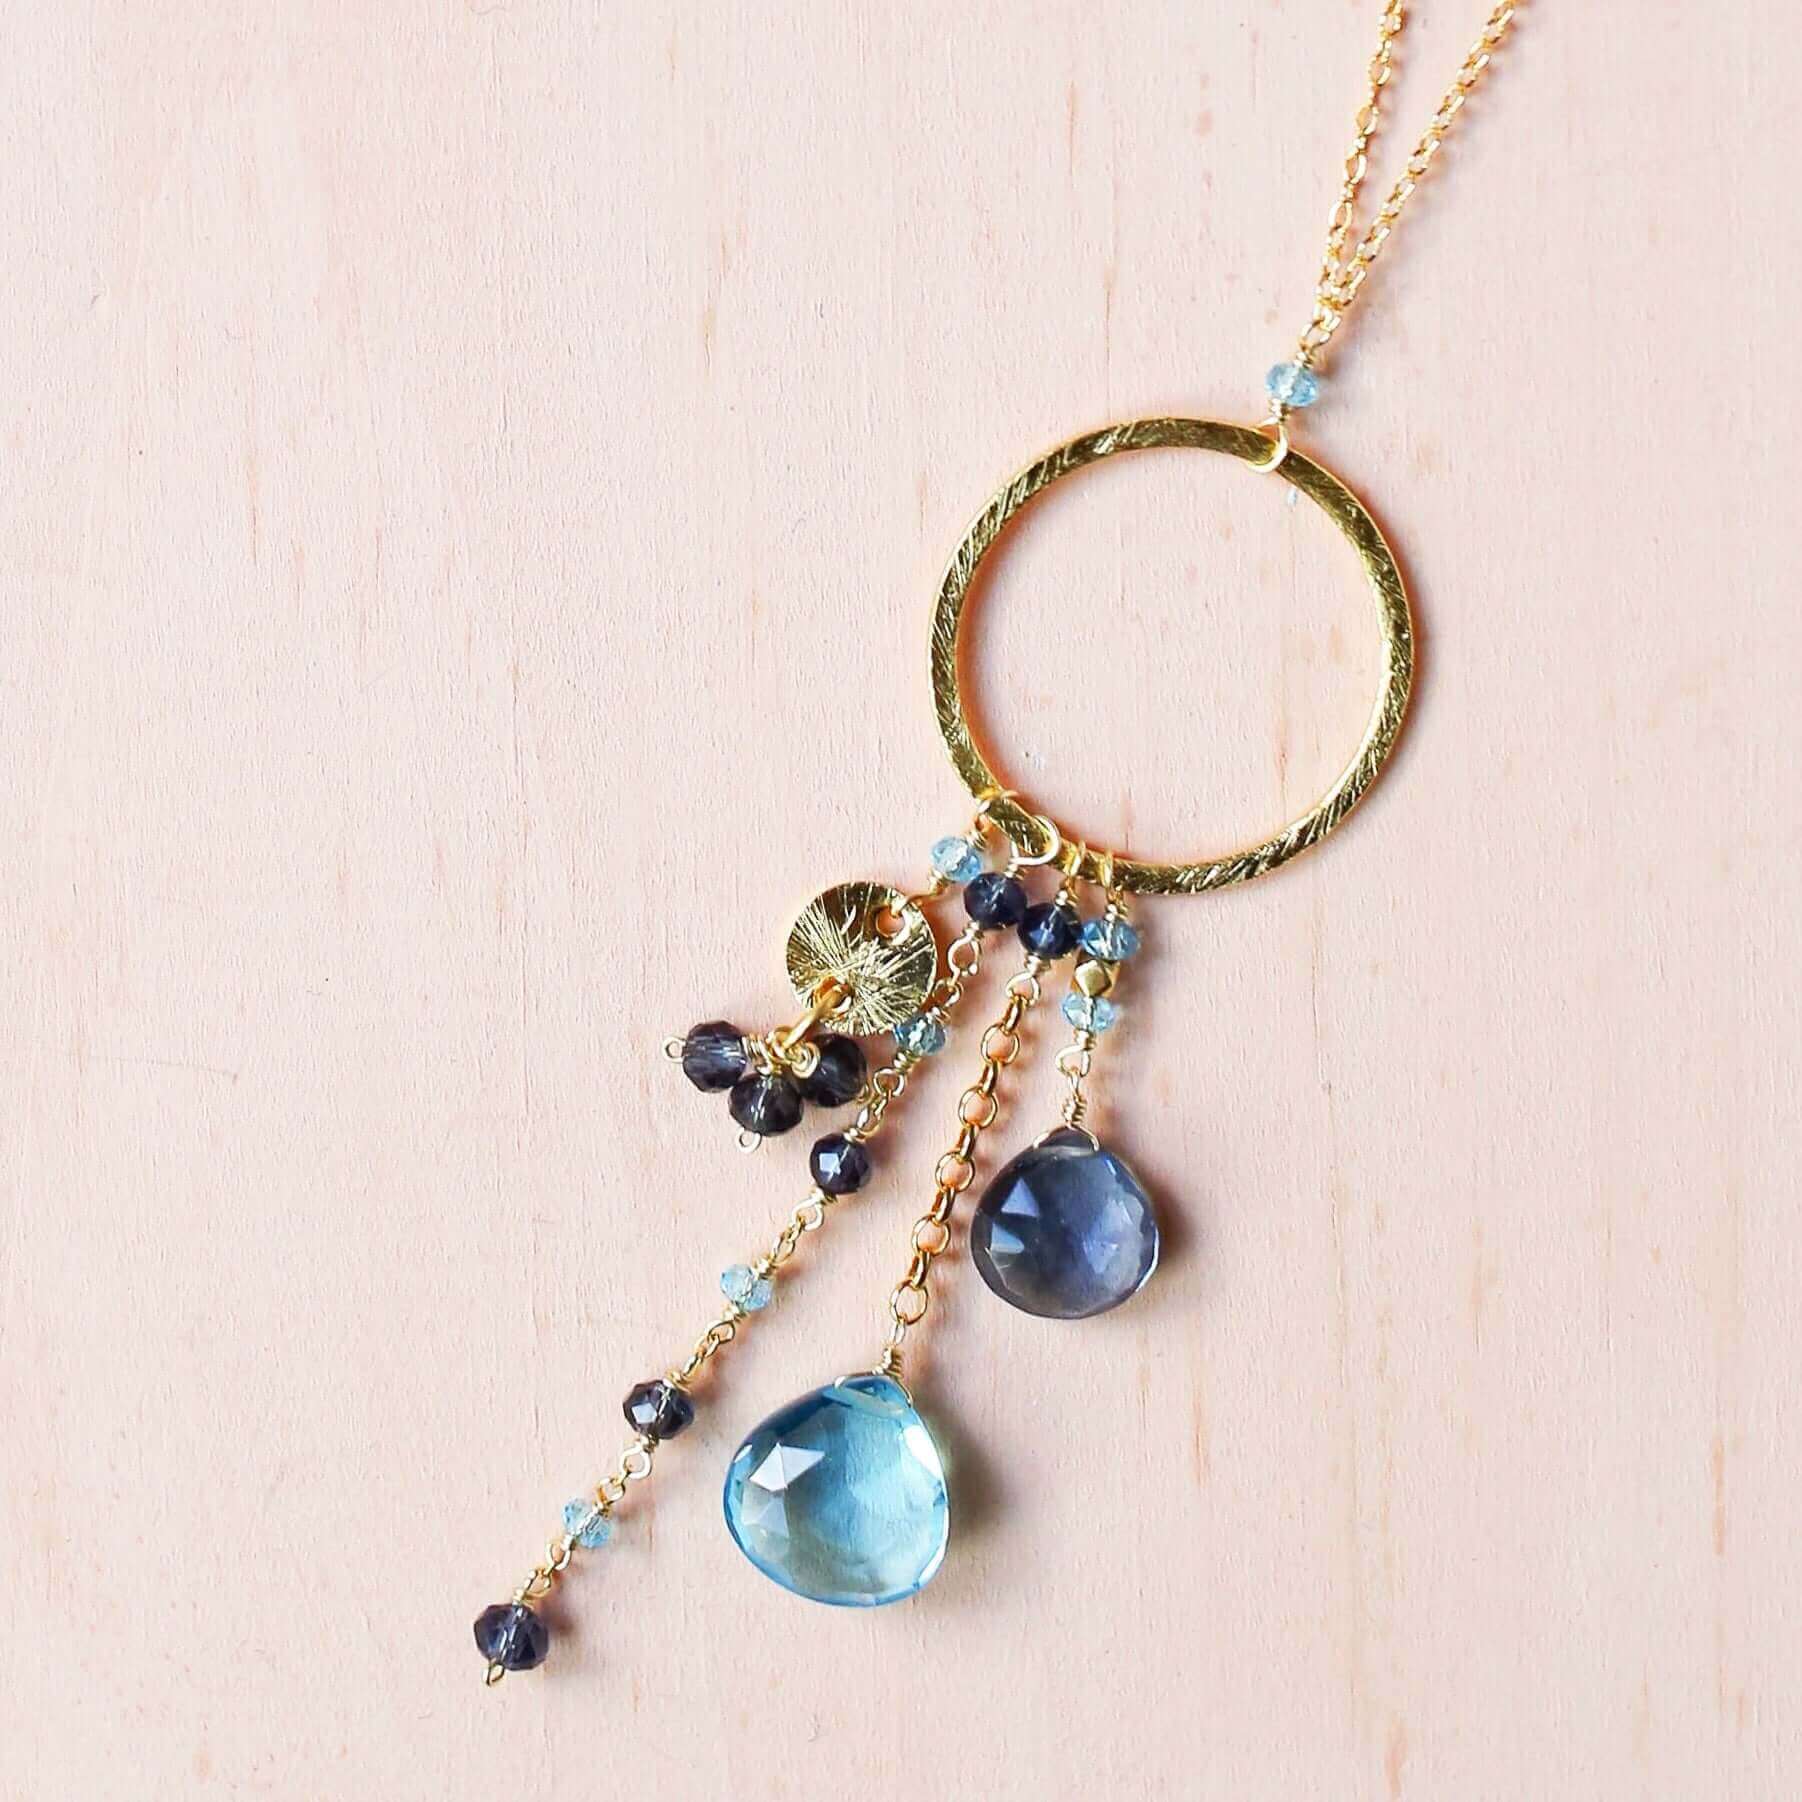 Buy Blue Sky Gemstone Necklace, Light Blue Stone Necklace, Boho Dainty  Crystal Necklace, Beaded Gold Chain, Healing Jewelry, Gift for Wife Online  in India - Etsy